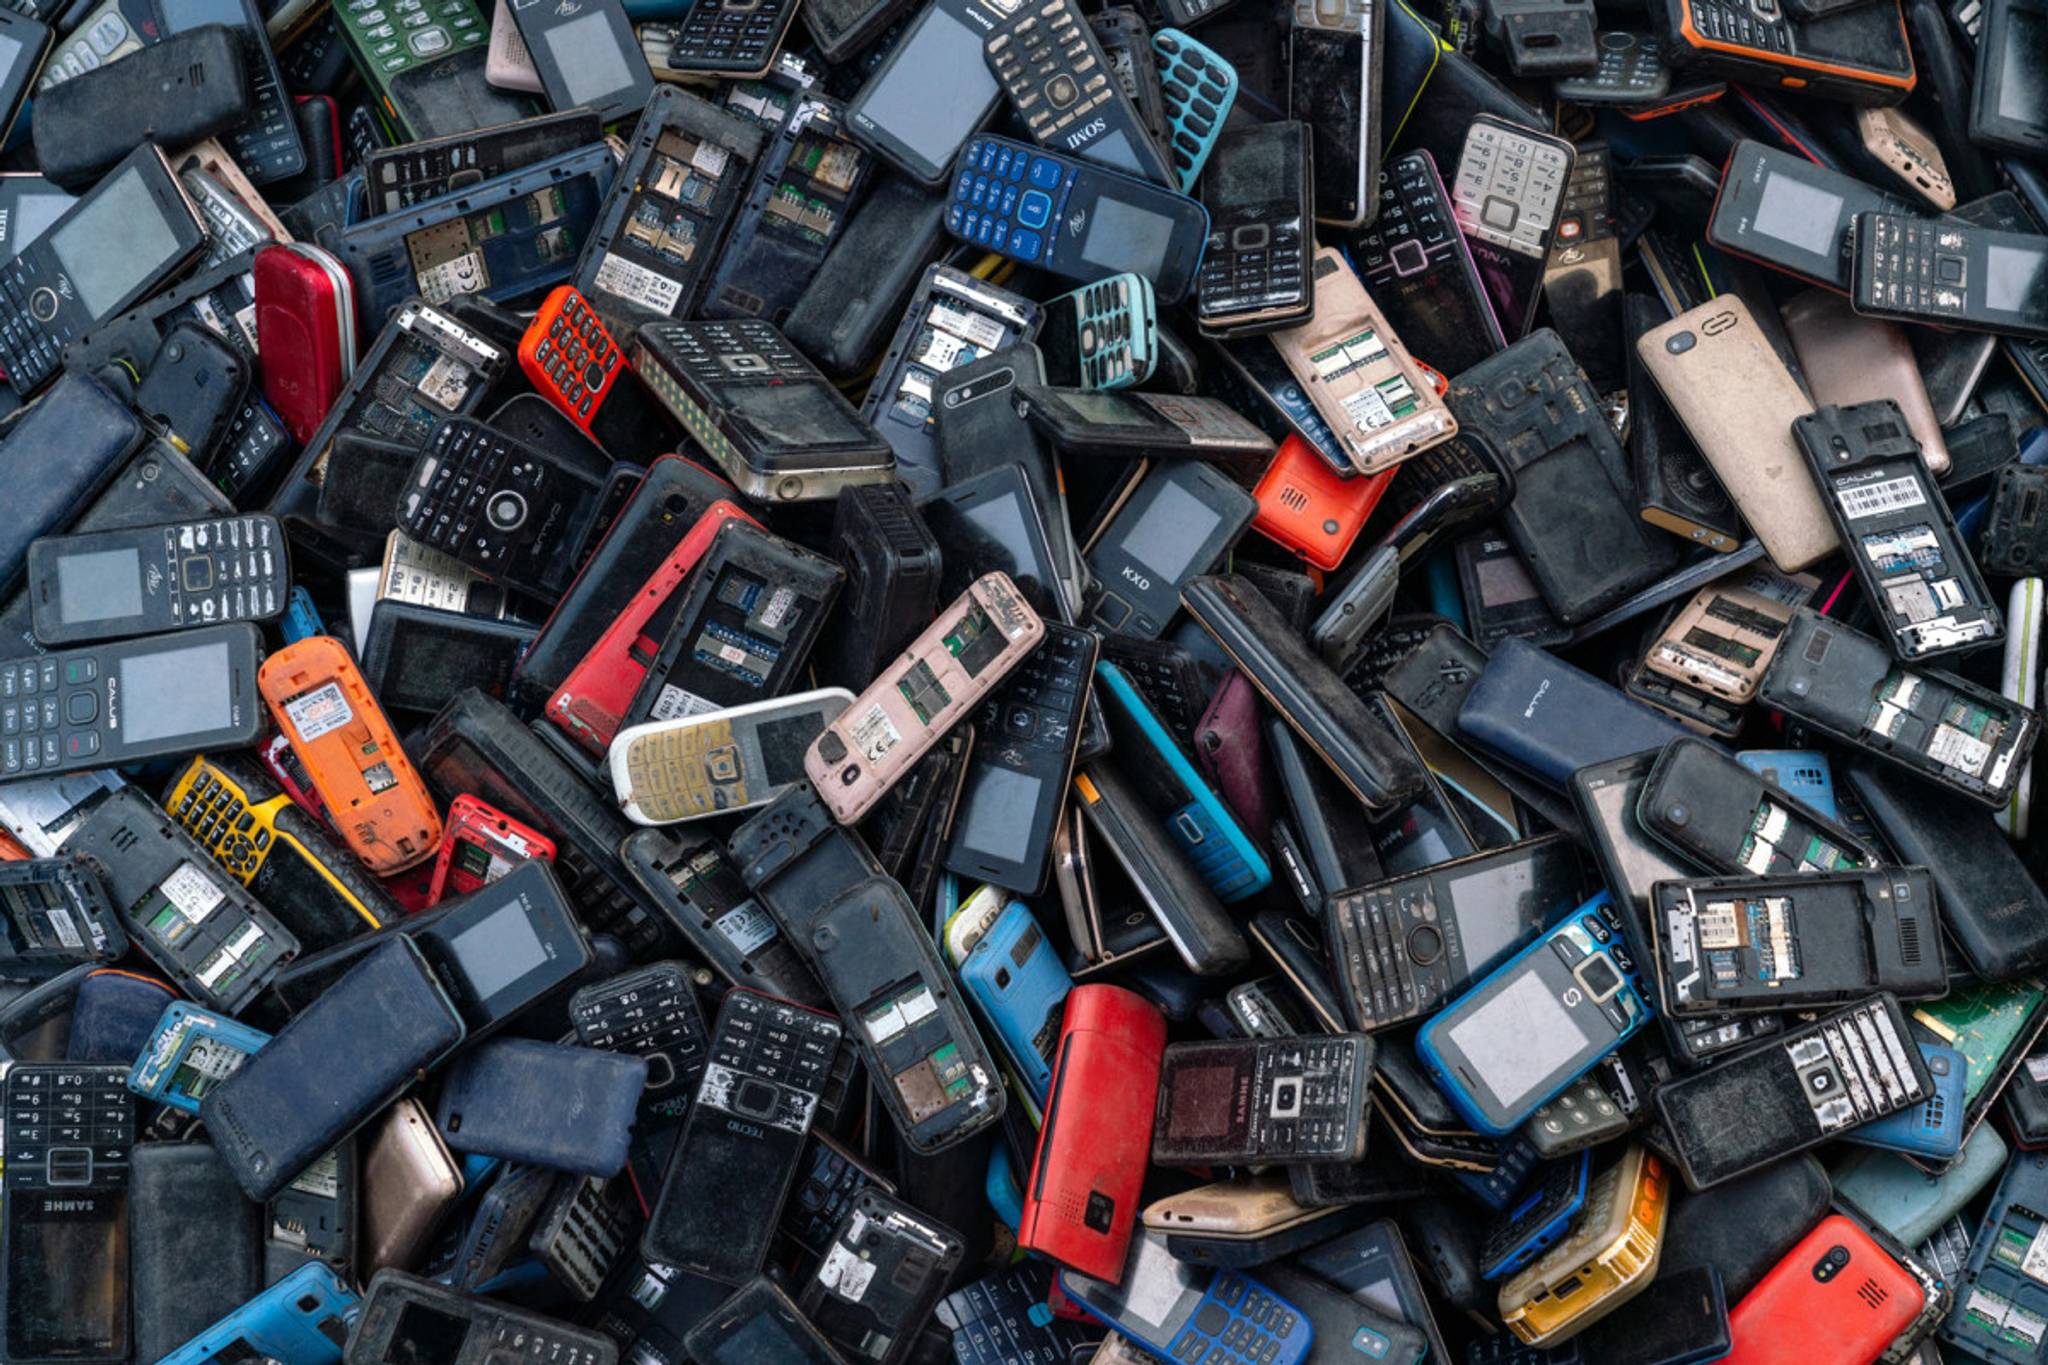 People need more education about e-waste recycling